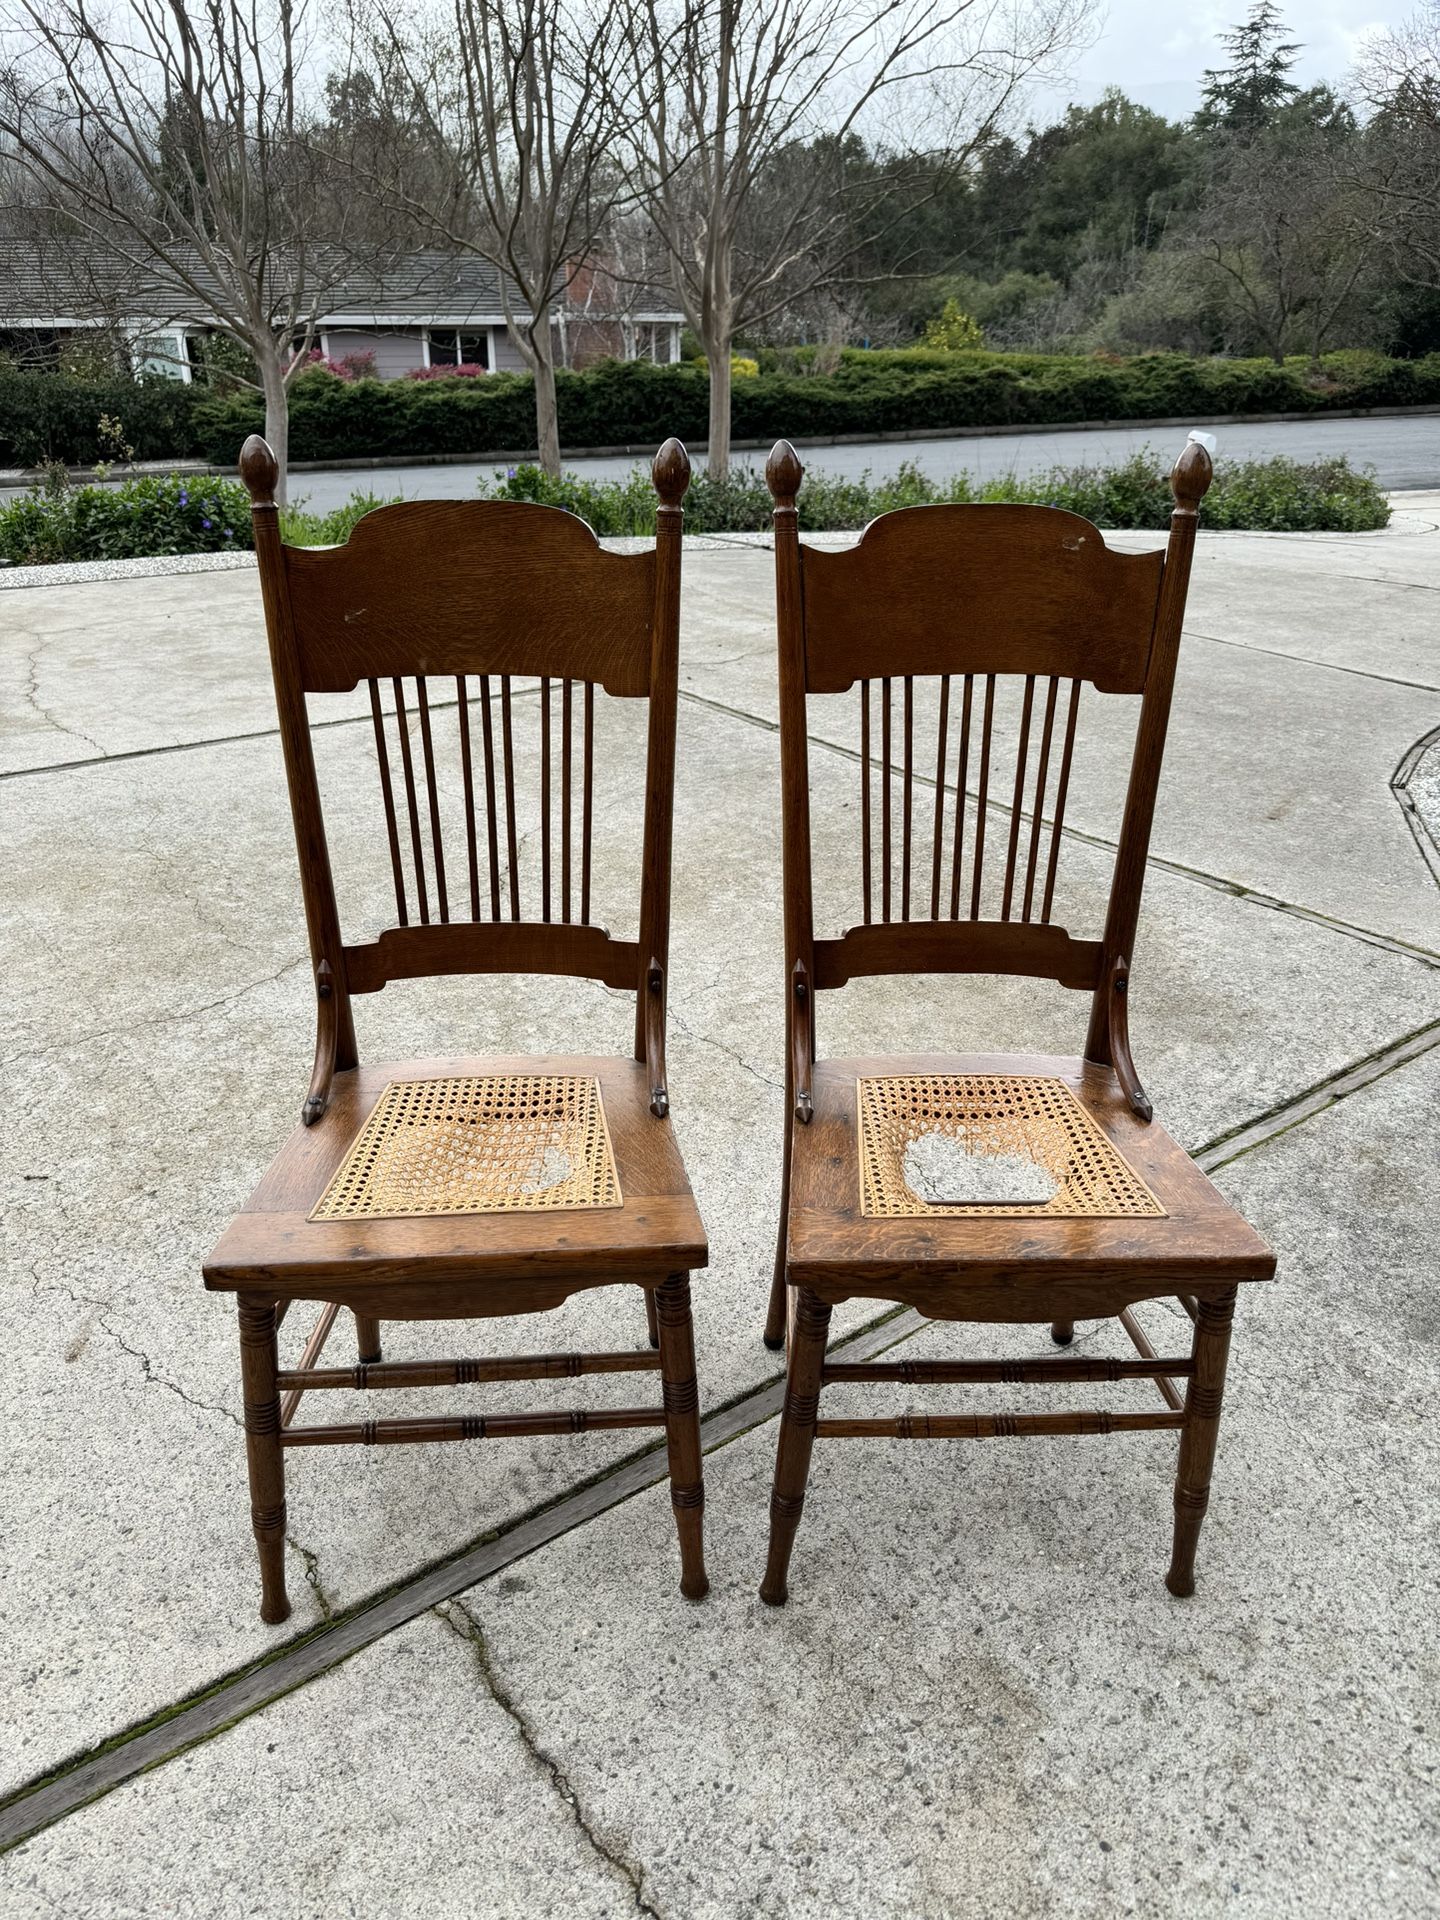 Two Vintage Oak Spindle Chairs